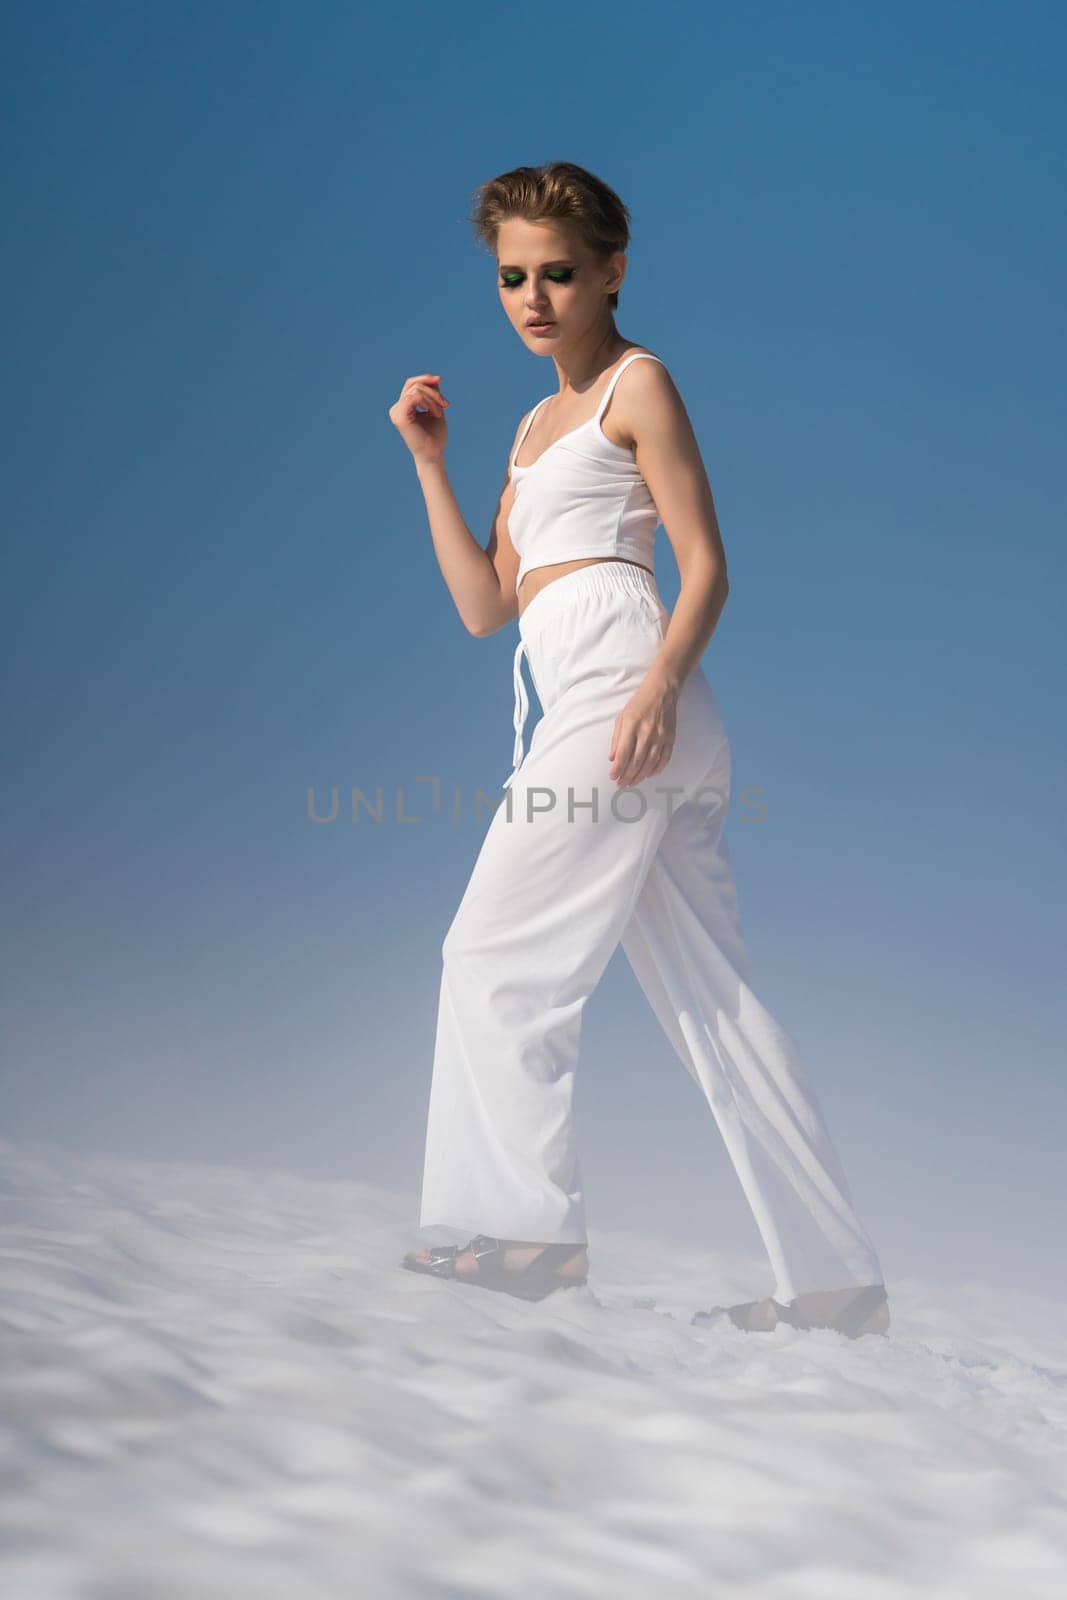 Beauty slim adult woman dressed in white crop top, white pants and sandals. European female tourist walking through snow with light fog on sunny weather with blue sky. Full length, side view